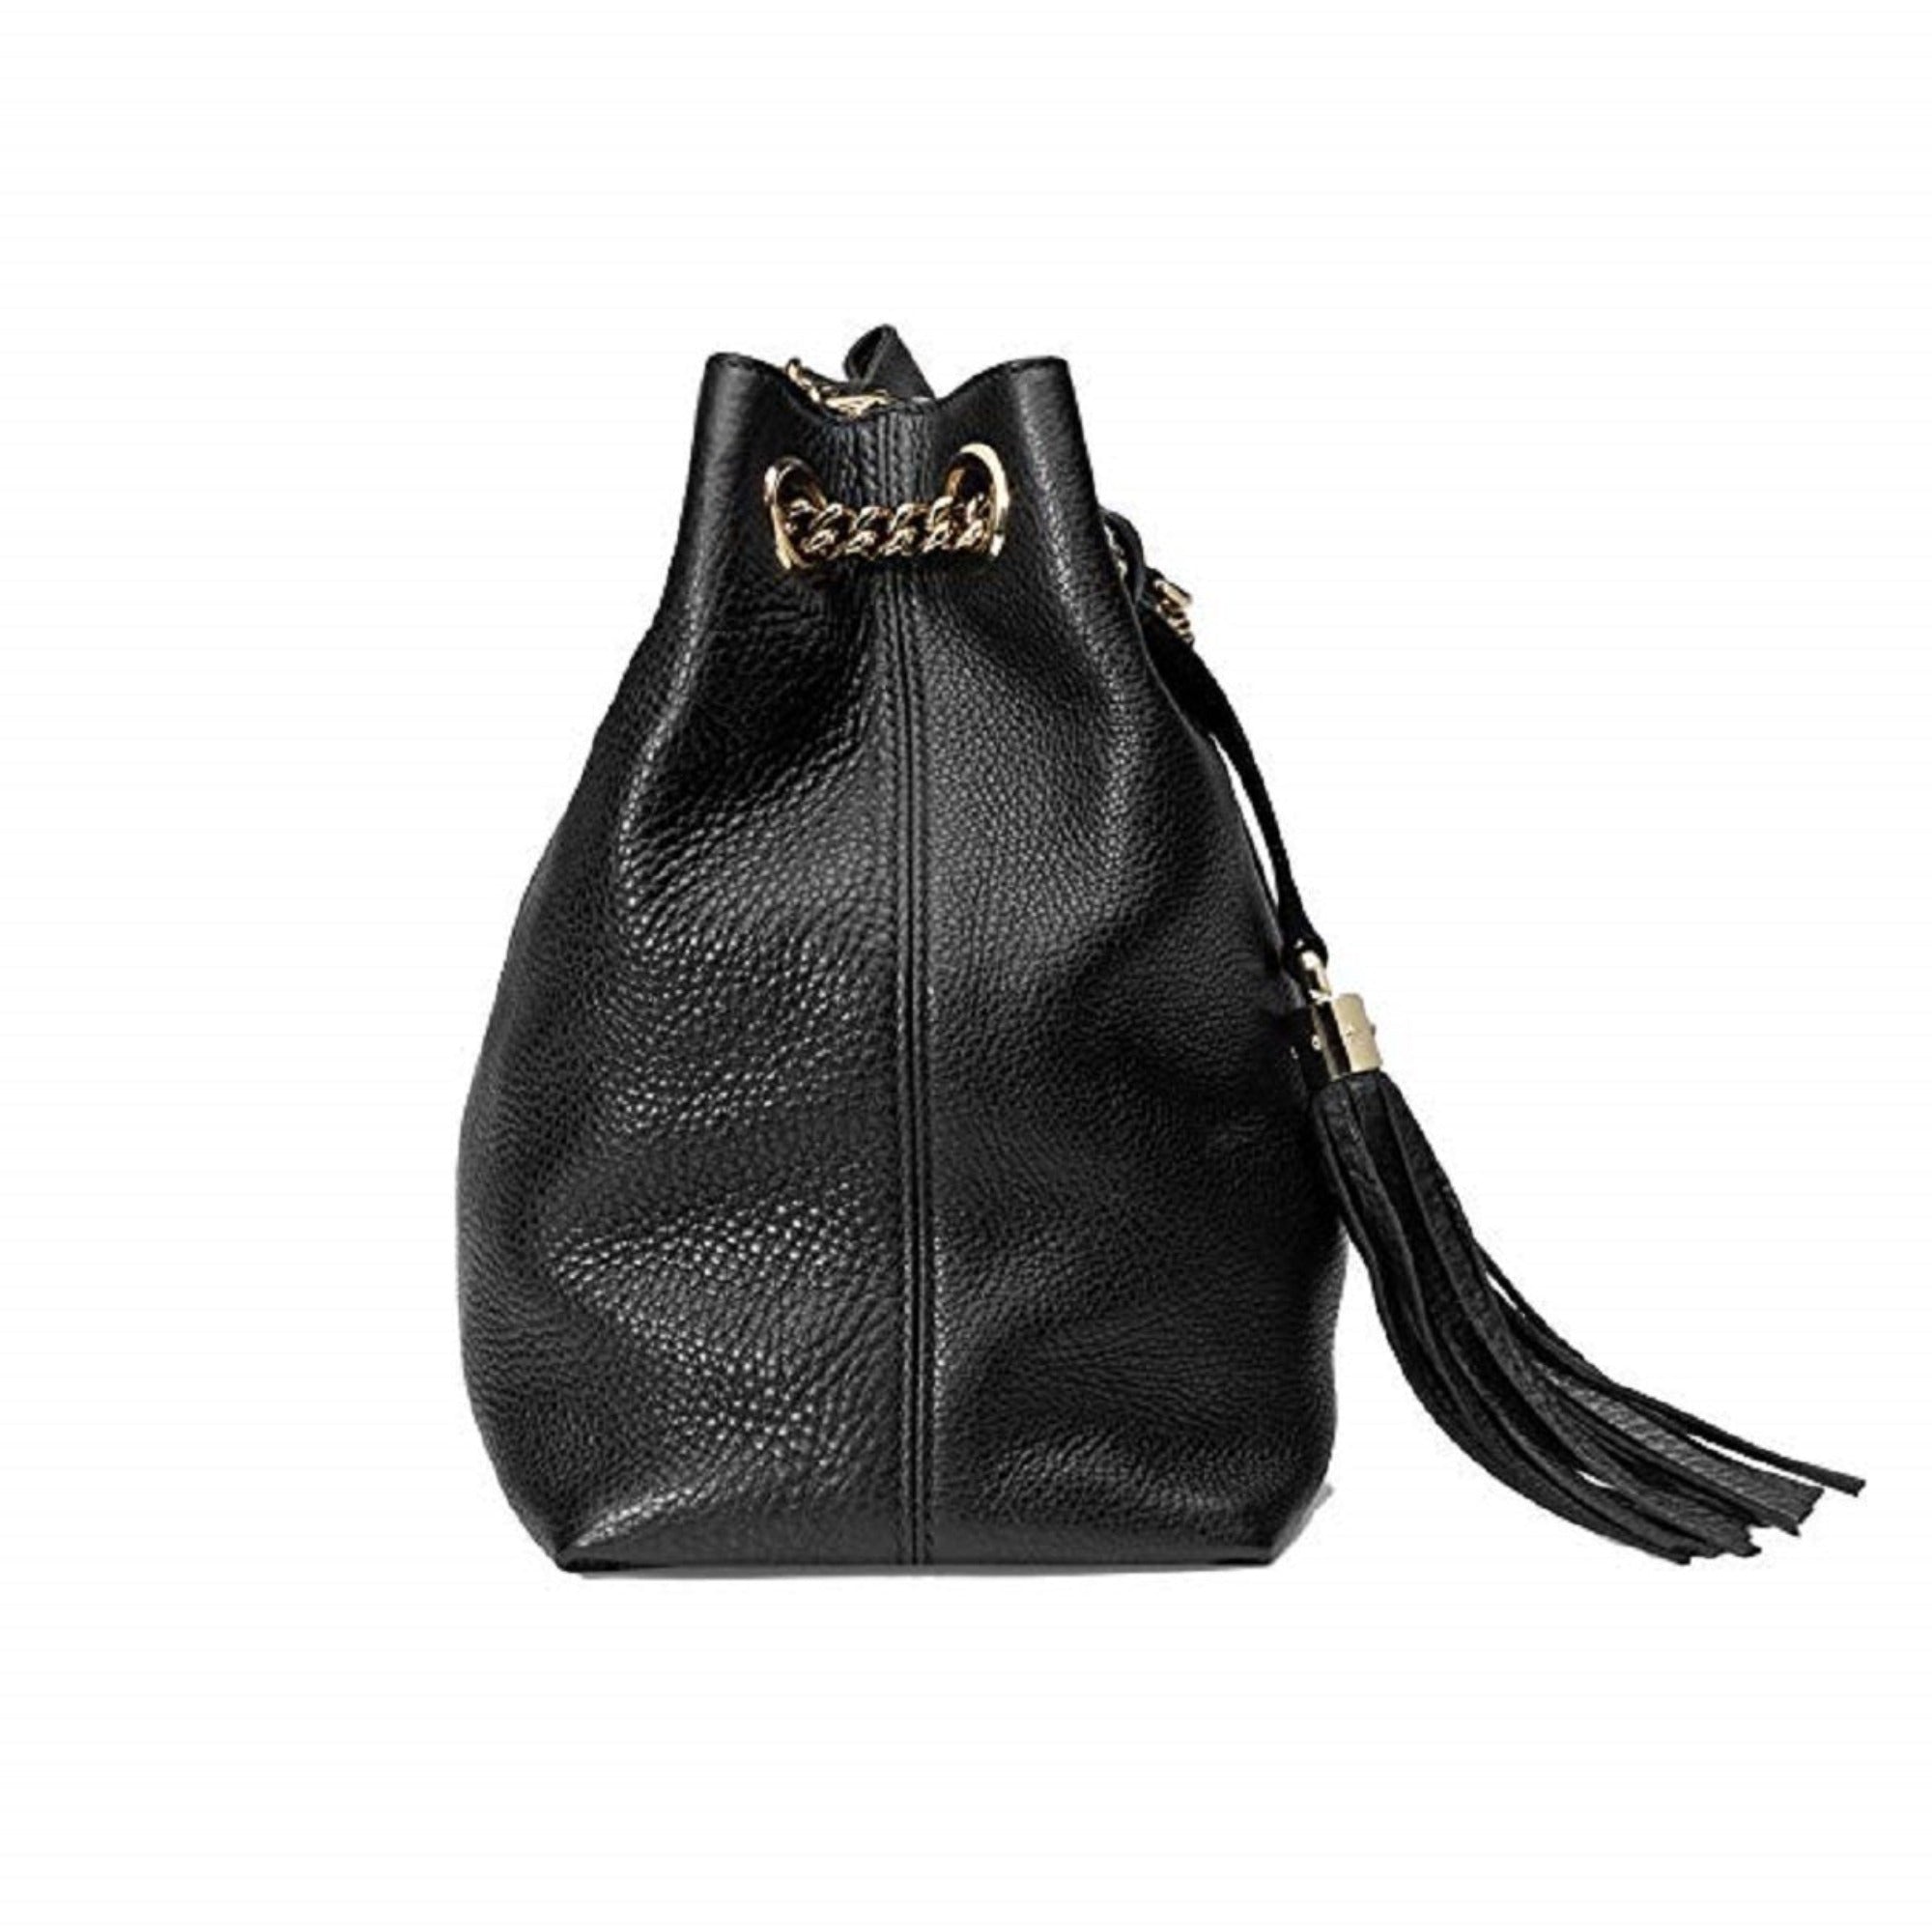 Gucci Soho Black Cellarius GG Logo Leather Chain Bag 308982 at_Queen_Bee_of_Beverly_Hills